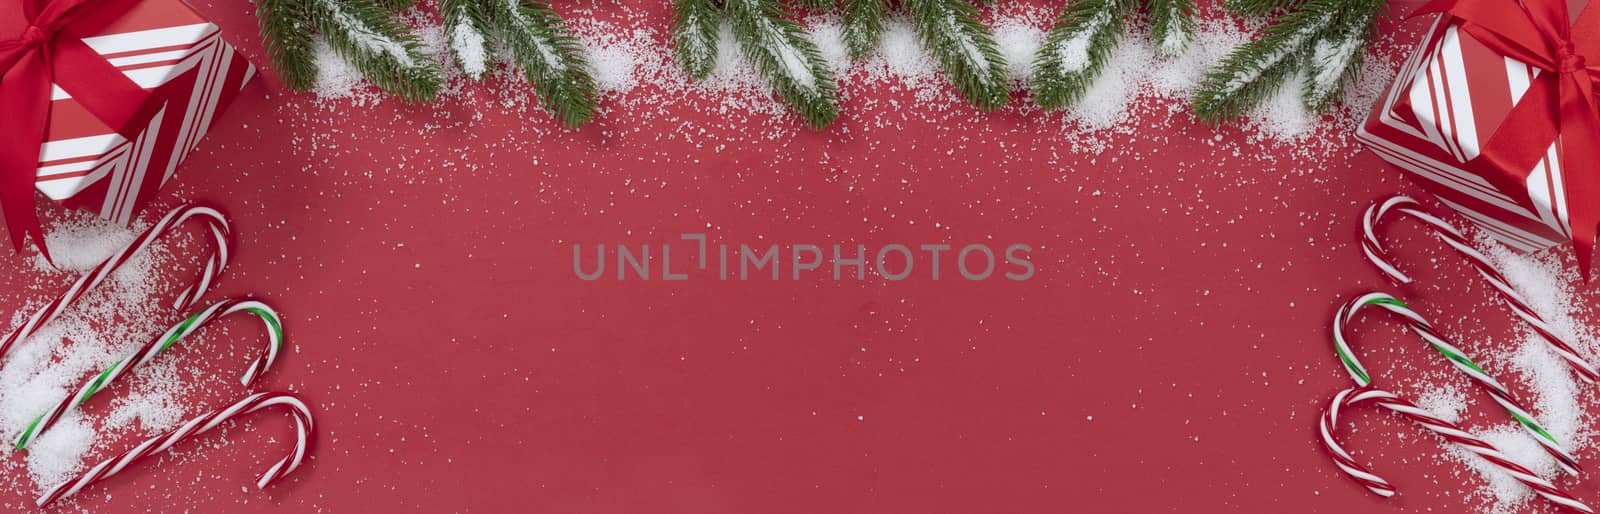 Seasonal Christmas decorations on red background with snow  